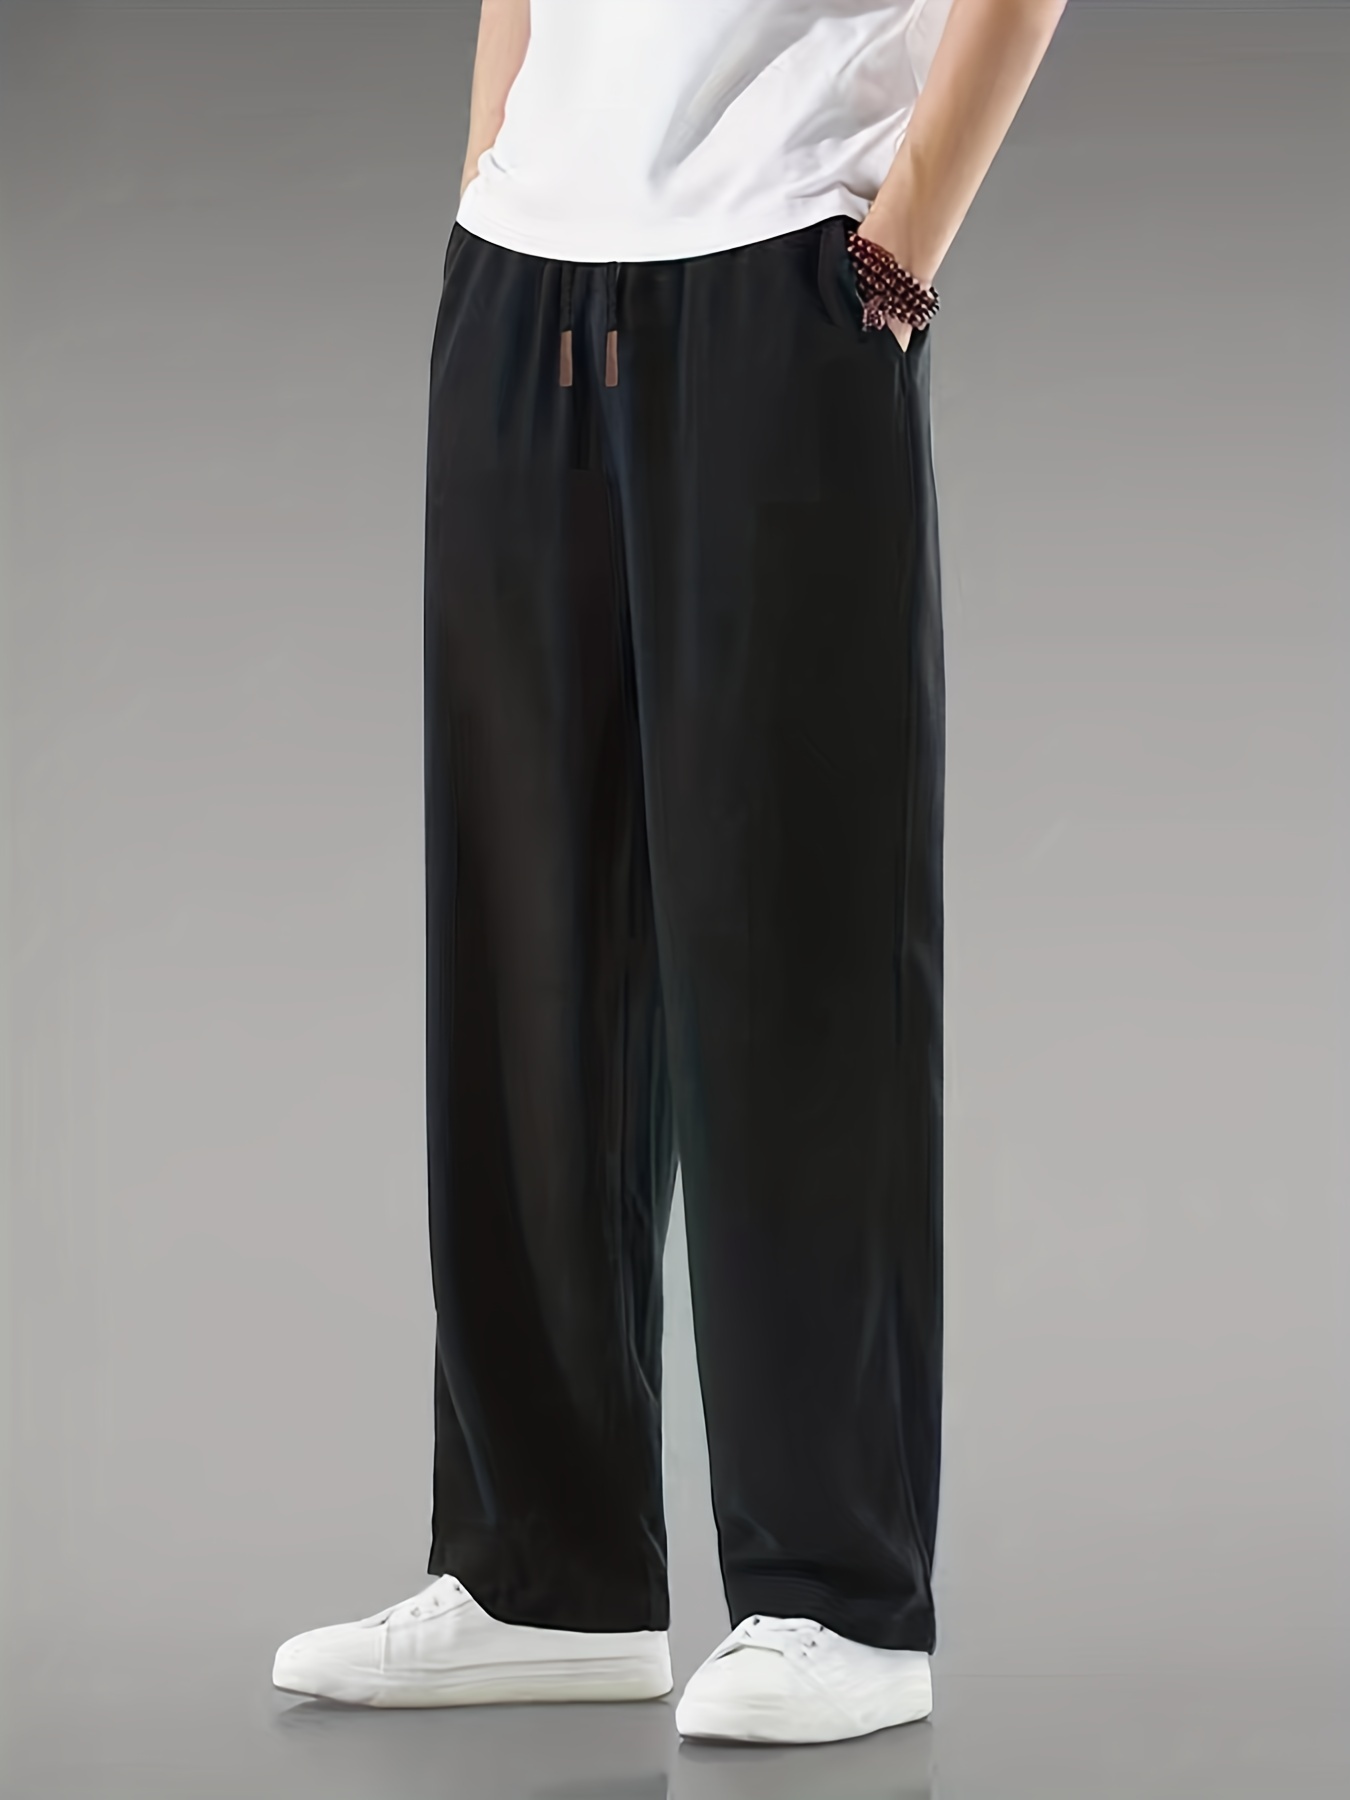 Style 500 Classic Lines Design Relaxed Fit Soft Baggy Pants For